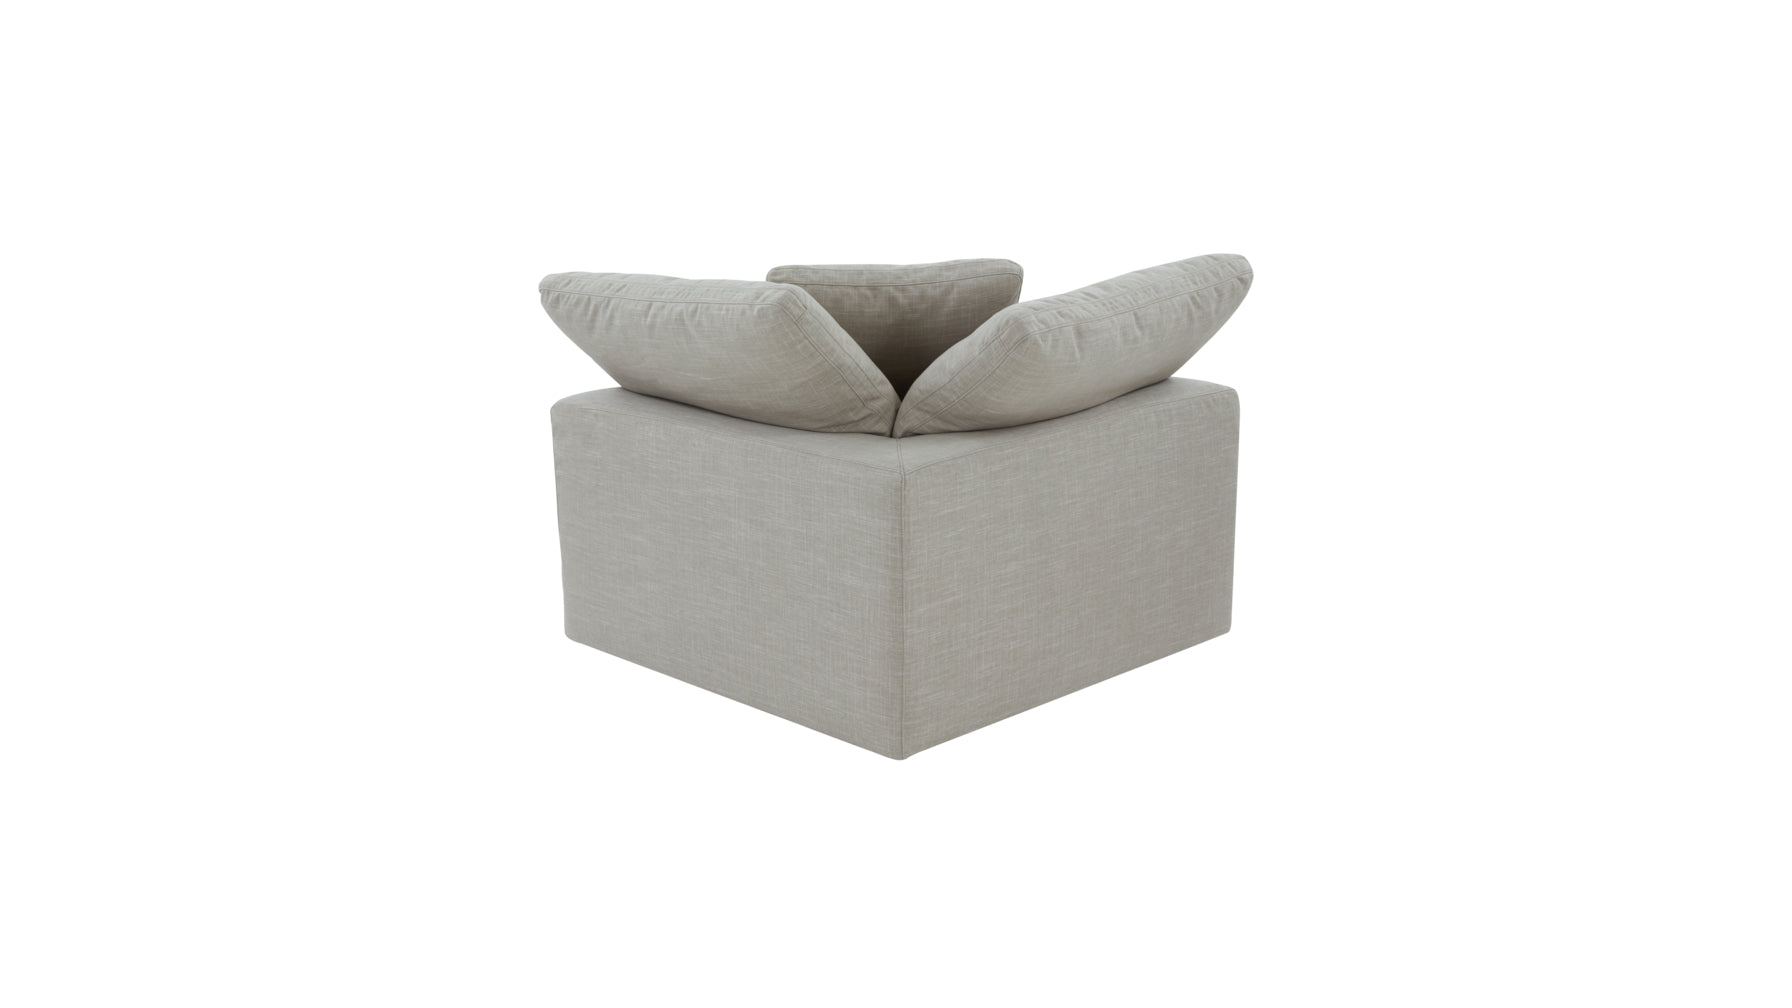 Movie Night™ Corner Chair, Large, Light Pebble (Left or Right) - Image 7